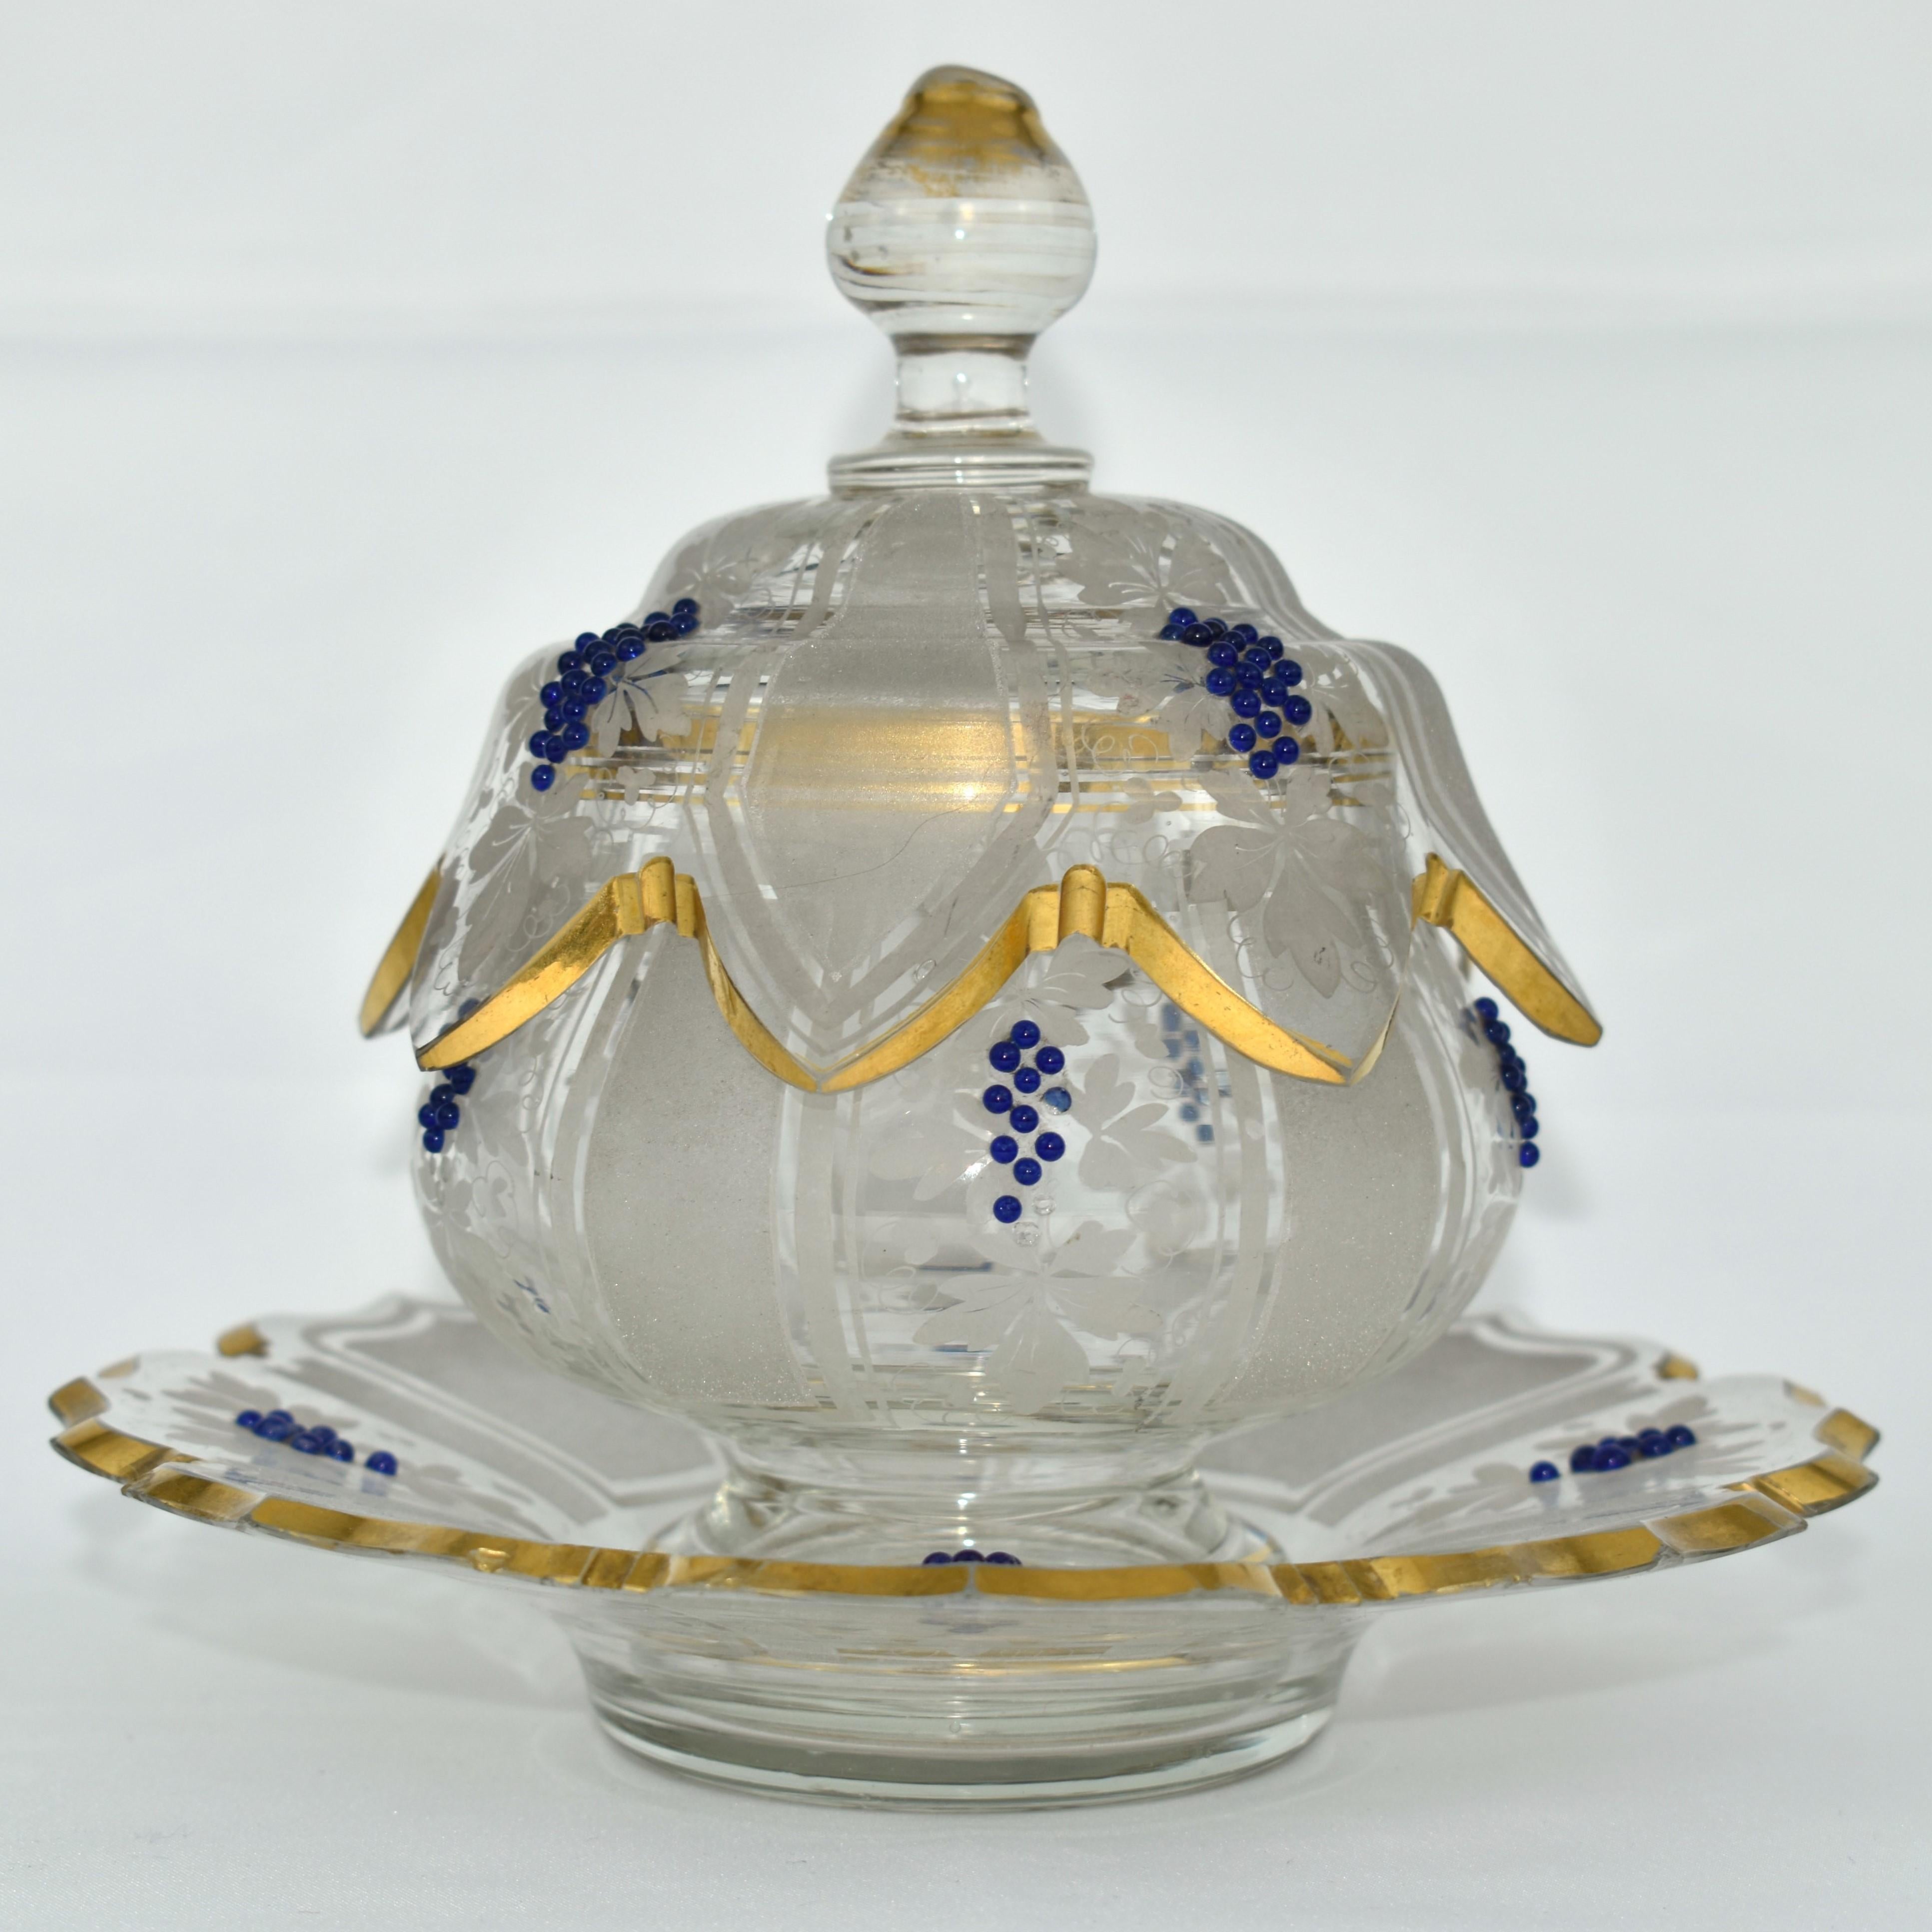 Exceptional bowl with saucer

Fine quality of the 19th Century glass manufacture

Hand painted with rich and impressive white enamel decoration and gilding highlights

Cobalt blue beads in form of grapes

Plate and cover with cut and gilded